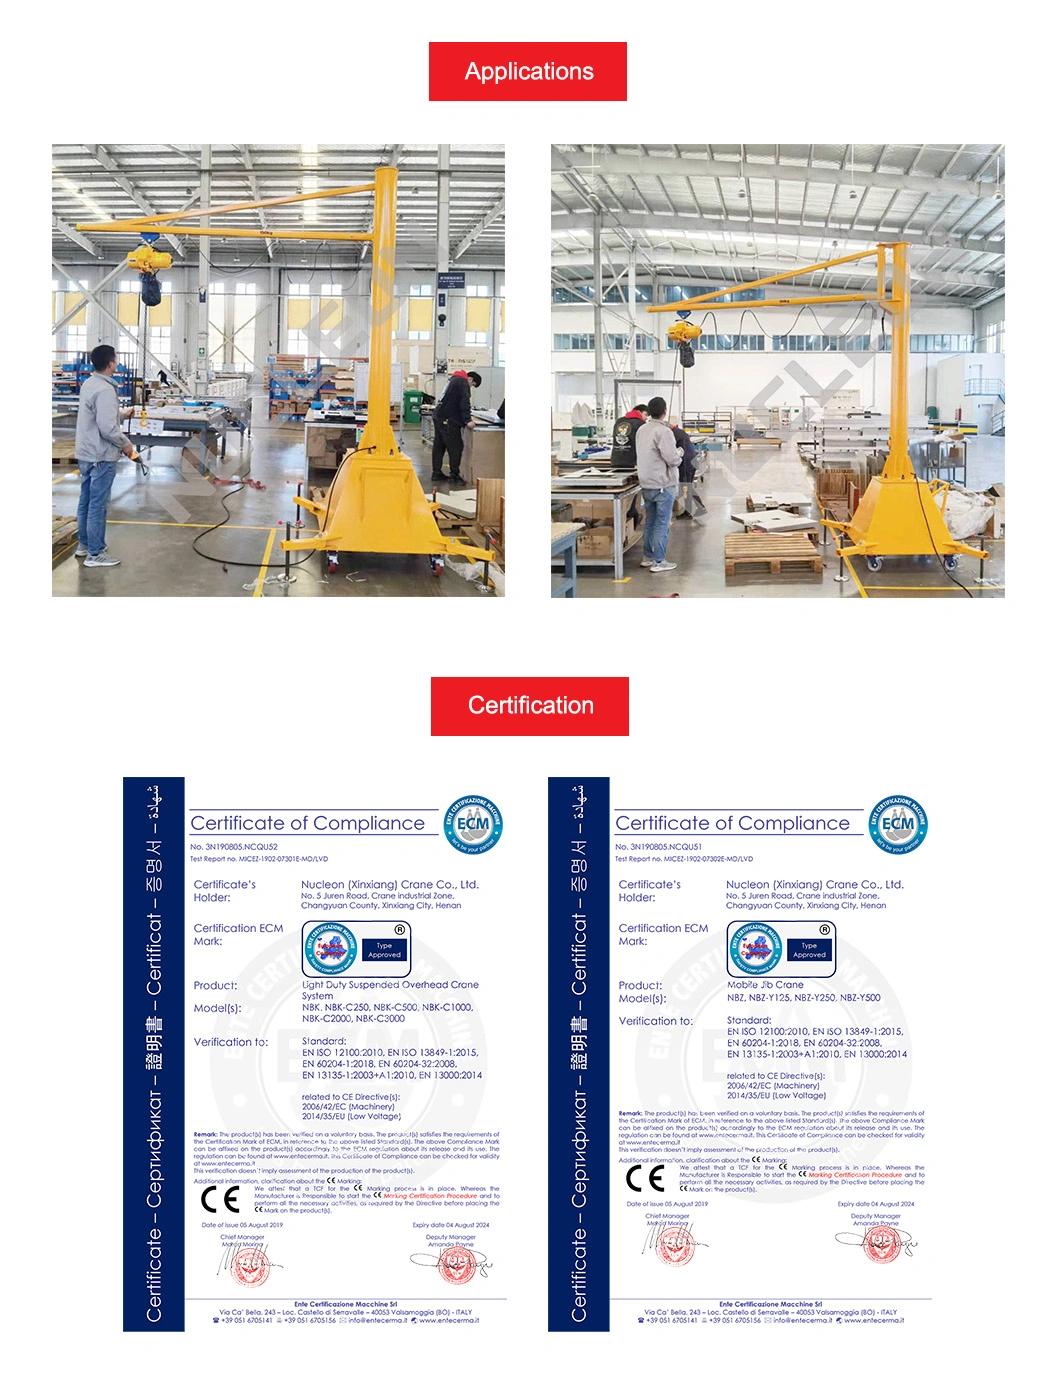 100 Kg 250 Kg 300 Kg 500 Kg Counterweight Type Mobile Jib Crane on Caster Wheels with Cheap Prices